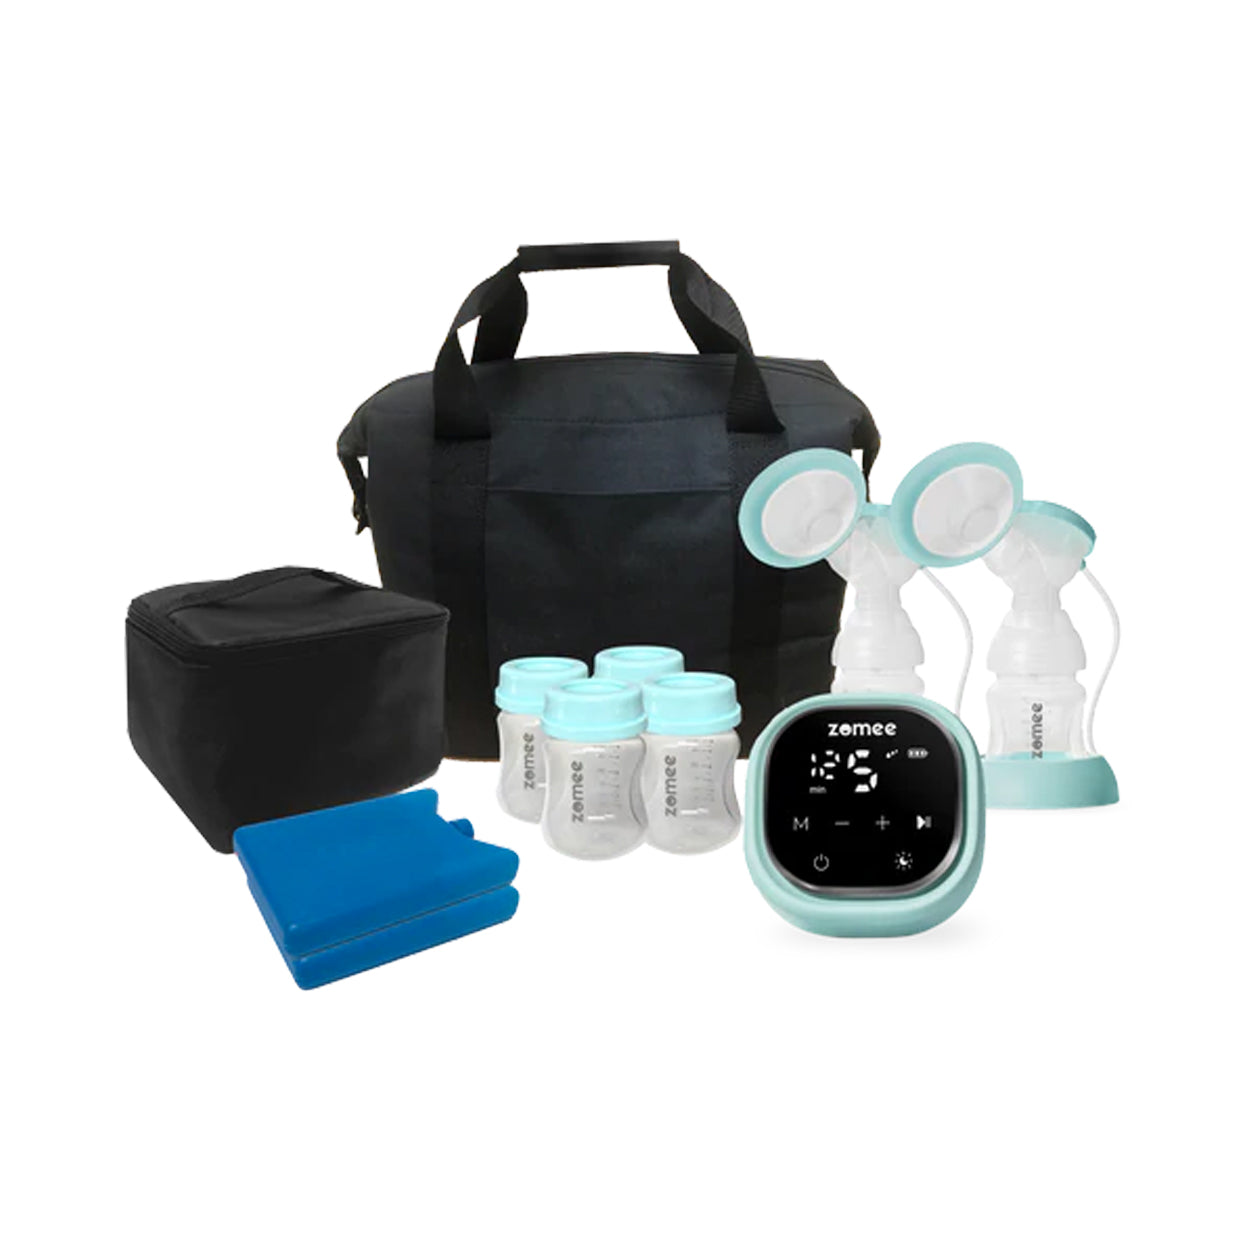 Zomee Z2 Bundle With Tote And Cooler (NY Medicaid Compliant)